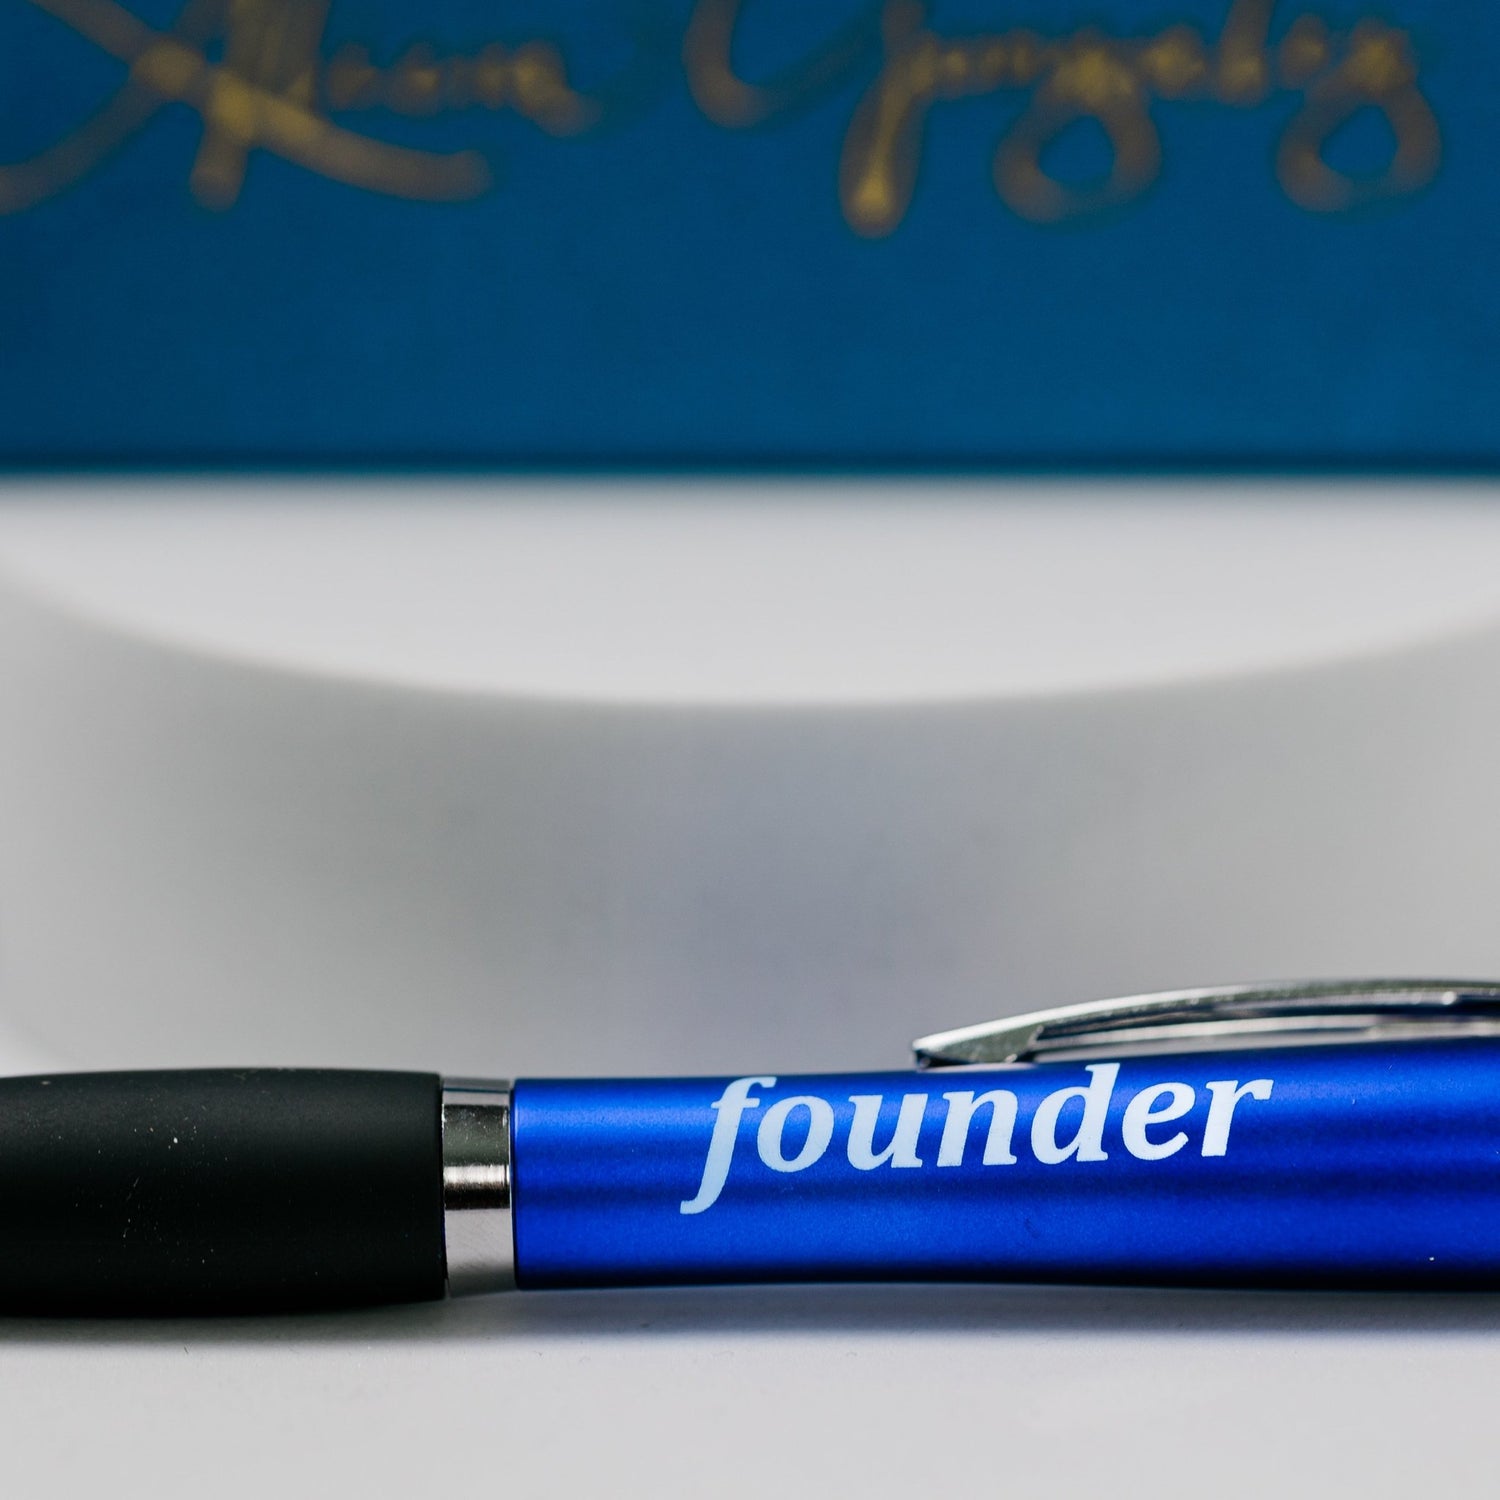 Light Up Pen with FOUNDER Logo - Alicia GonzalezPens